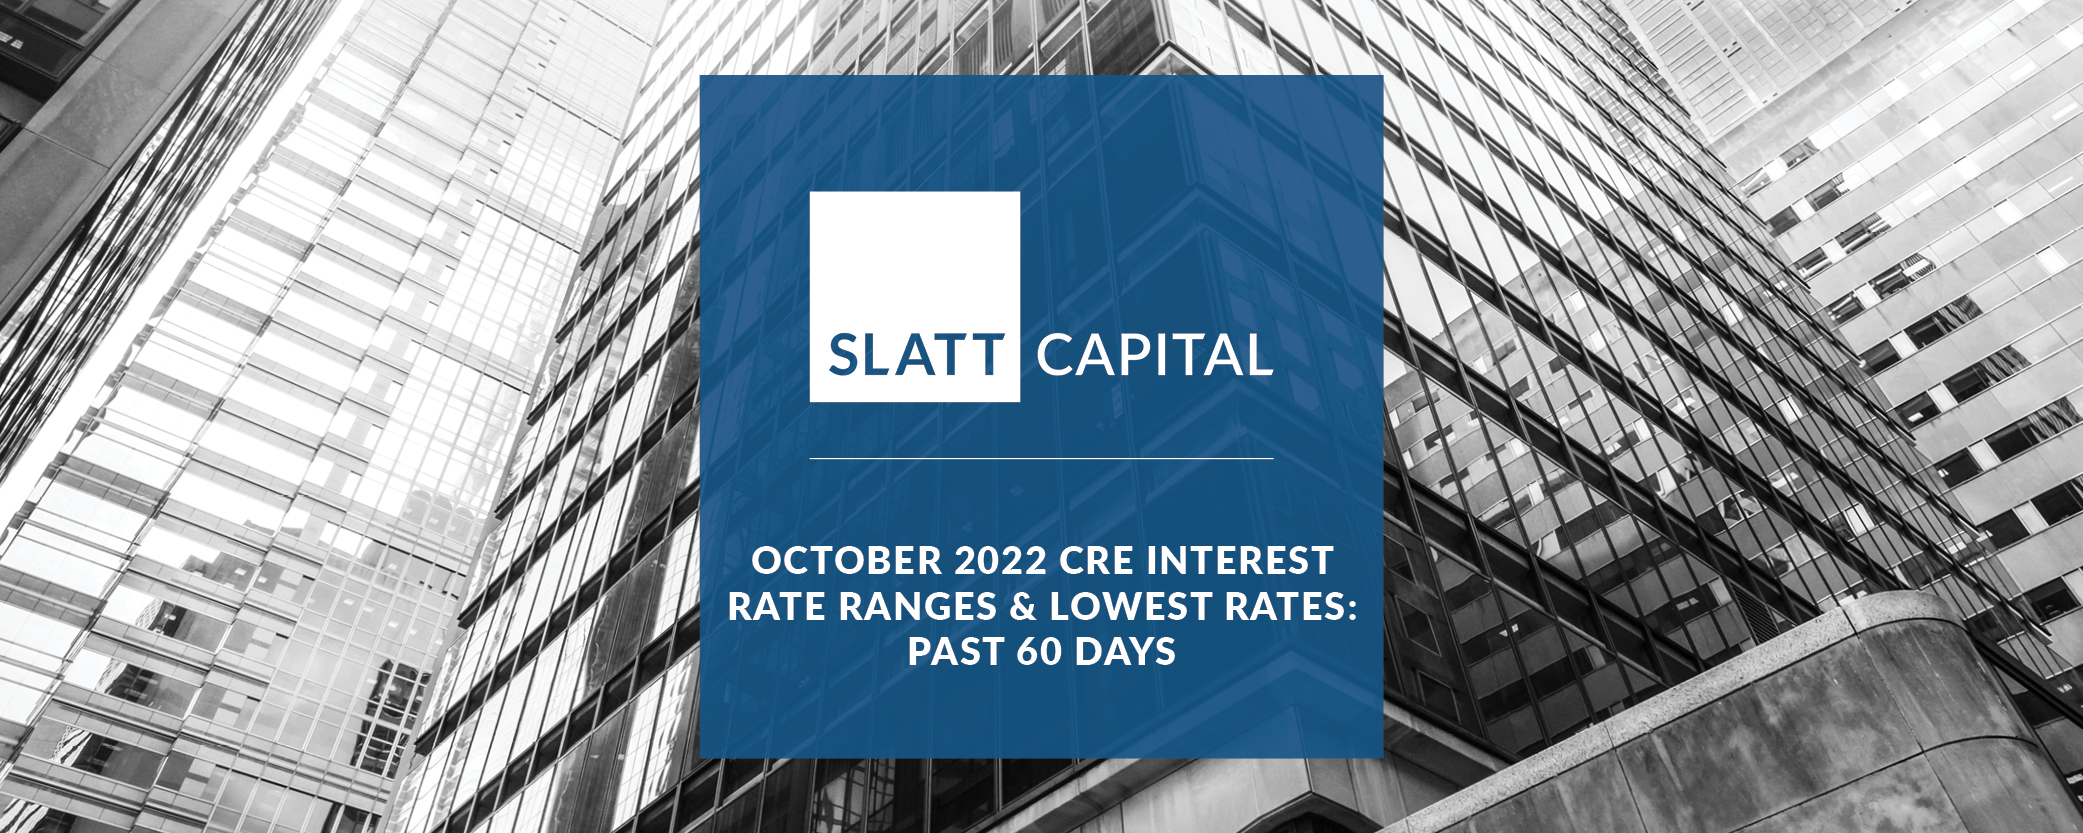 October 2022 cre interest rate ranges & lowest rates: past 60 days